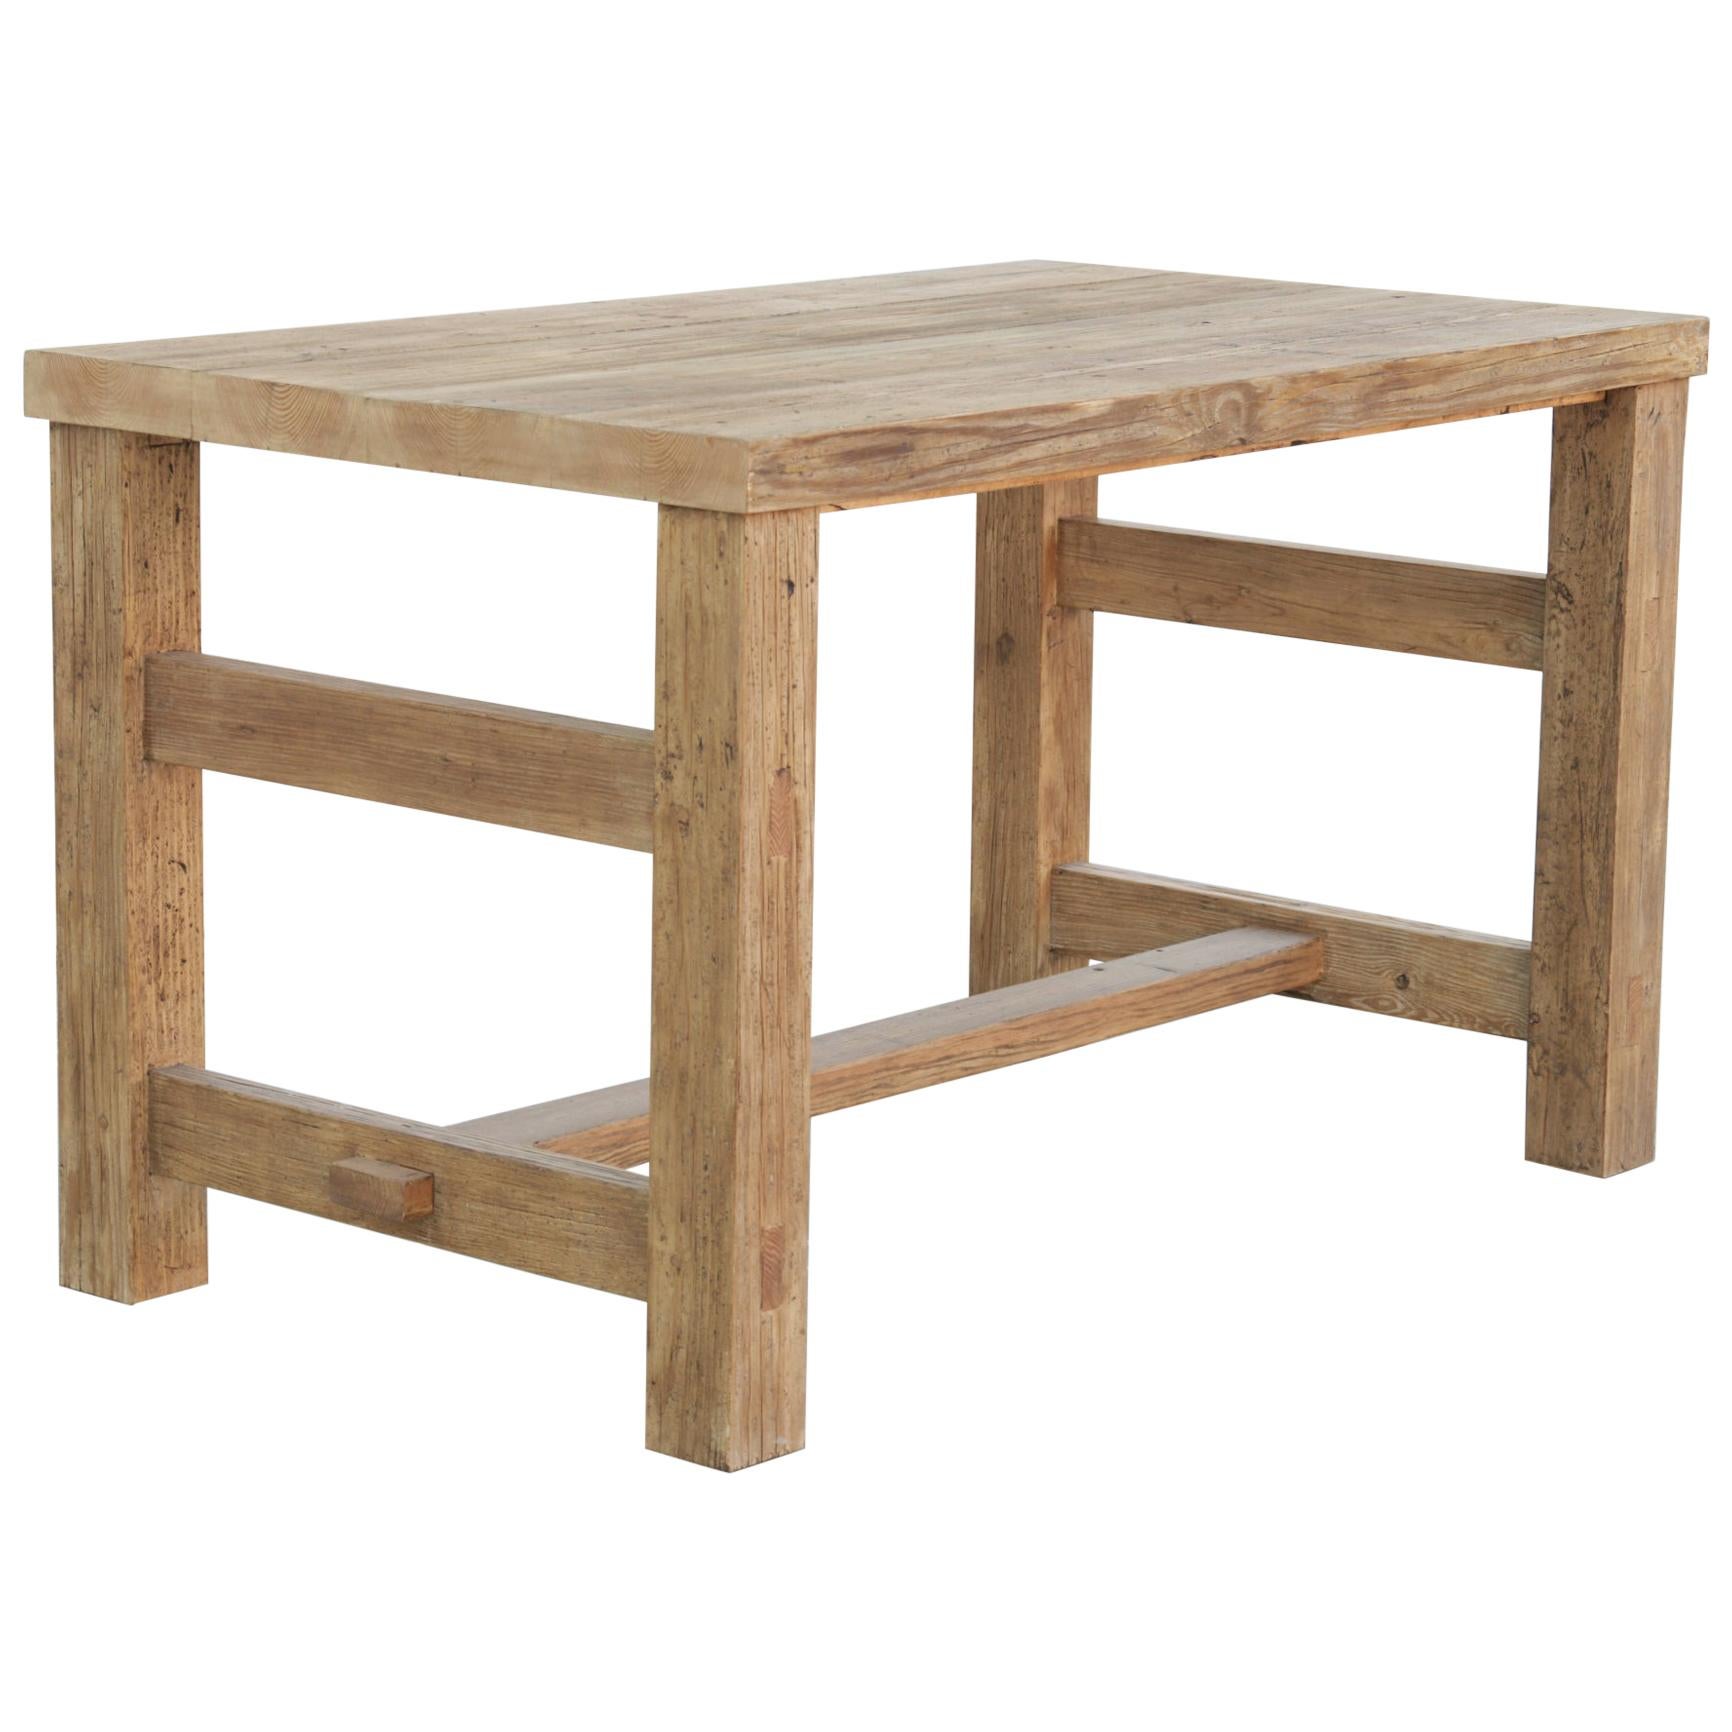 Reclaimed Pine Butcher Block Kitchen Island, Made to Order by Petersen Antiques